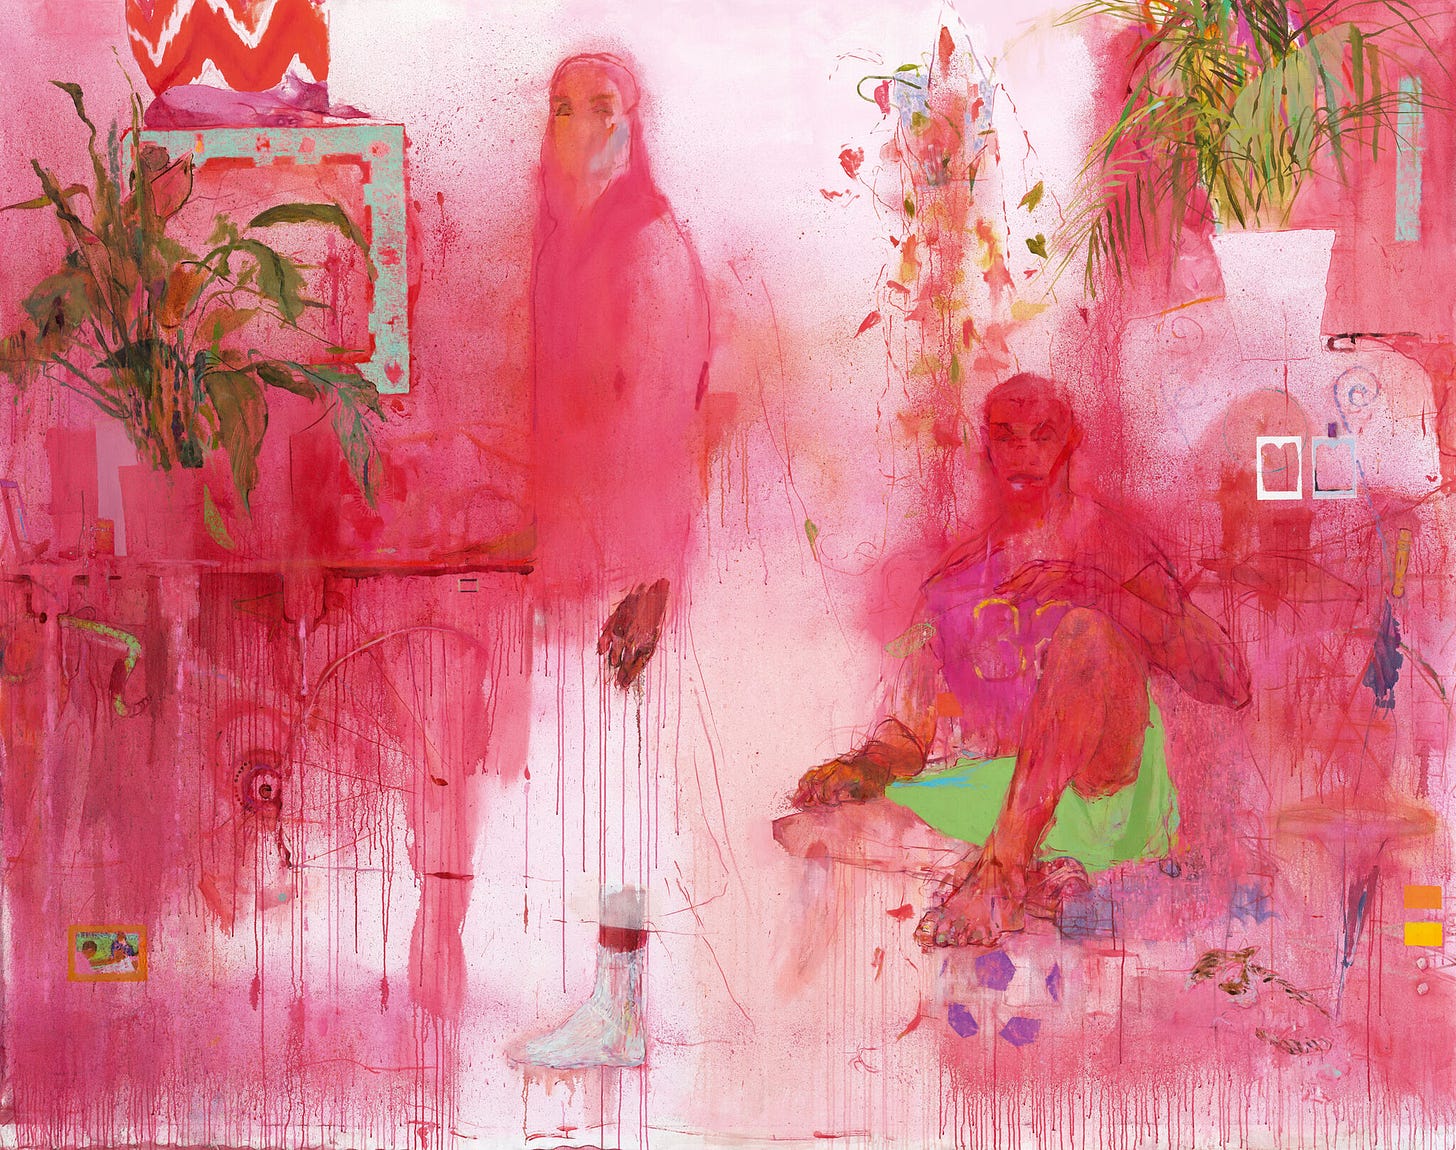 Two figures, one standing and one seated, in a pink room with plants, artwork, and furniture subtly emerging from the painterly background.